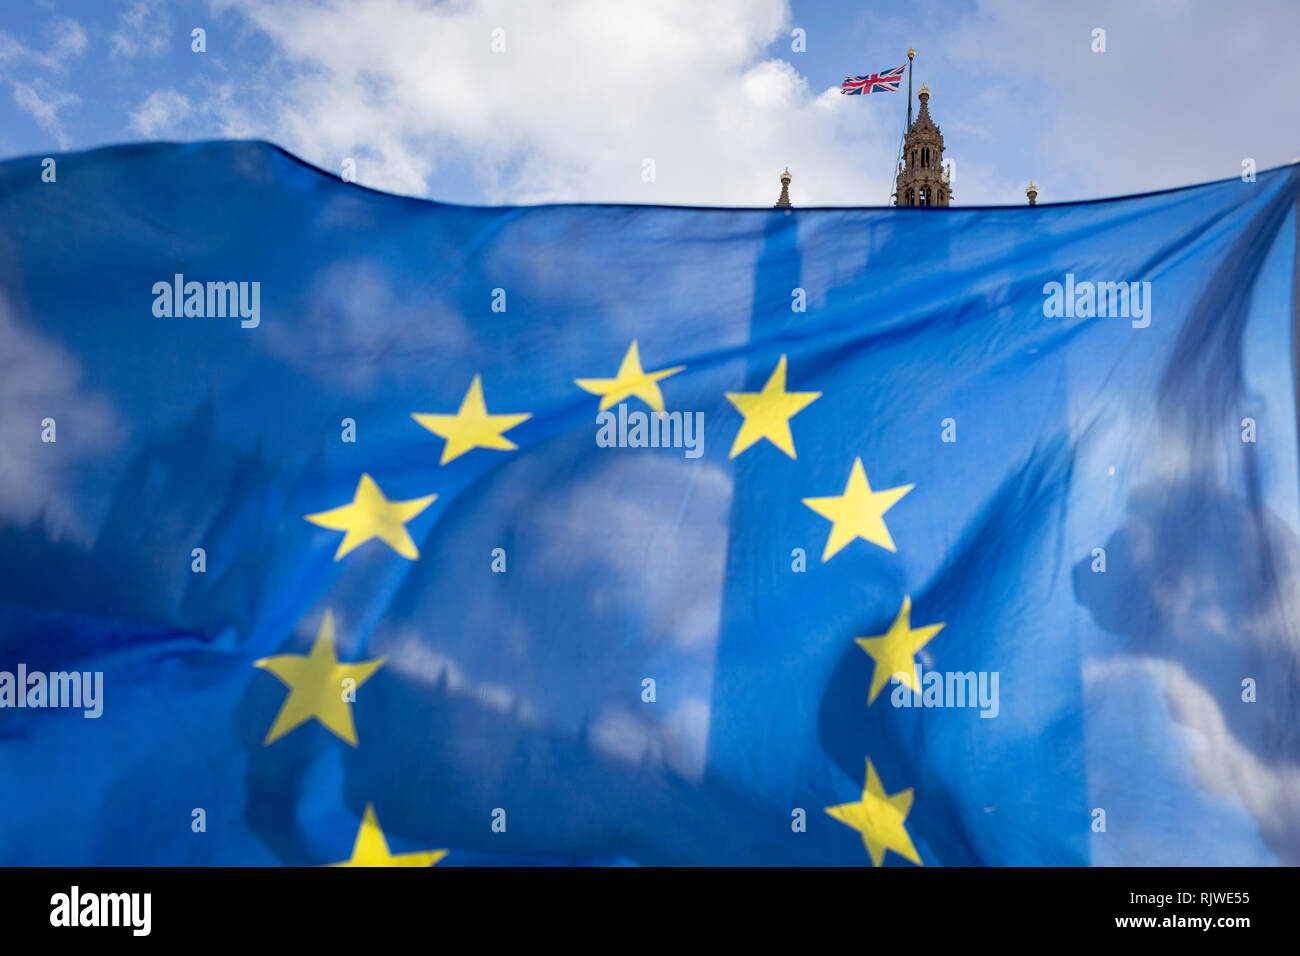 As Prime Minister Theresa May negotiates further Britain's exit from the European Union in Brussels, the UK parliament is seen through the yellow stars of the EU flag, flying as part of an anti-Brexit protest opposite the Houses of Parliament, on 7th February 2019, in Westminster, London England. Stock Photo